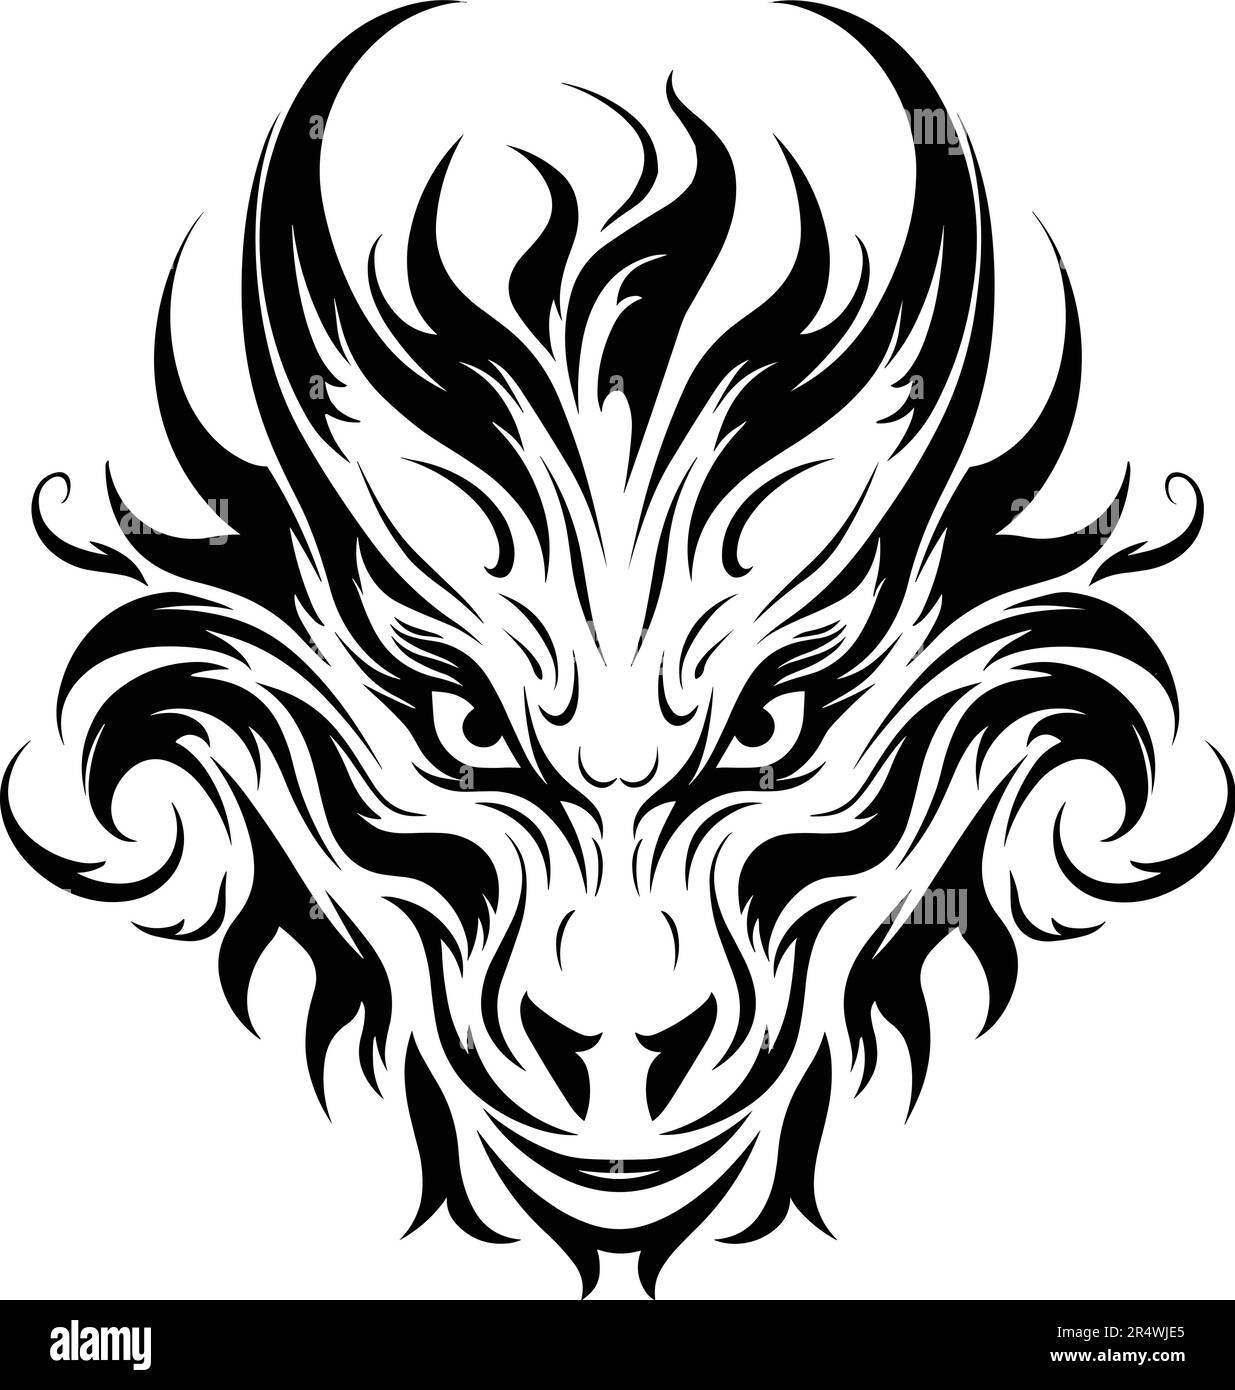 Dragon Tattoo, Tribal Dragon, Black and white dragon tattoo isolated on white background vector illustration Stock Vector